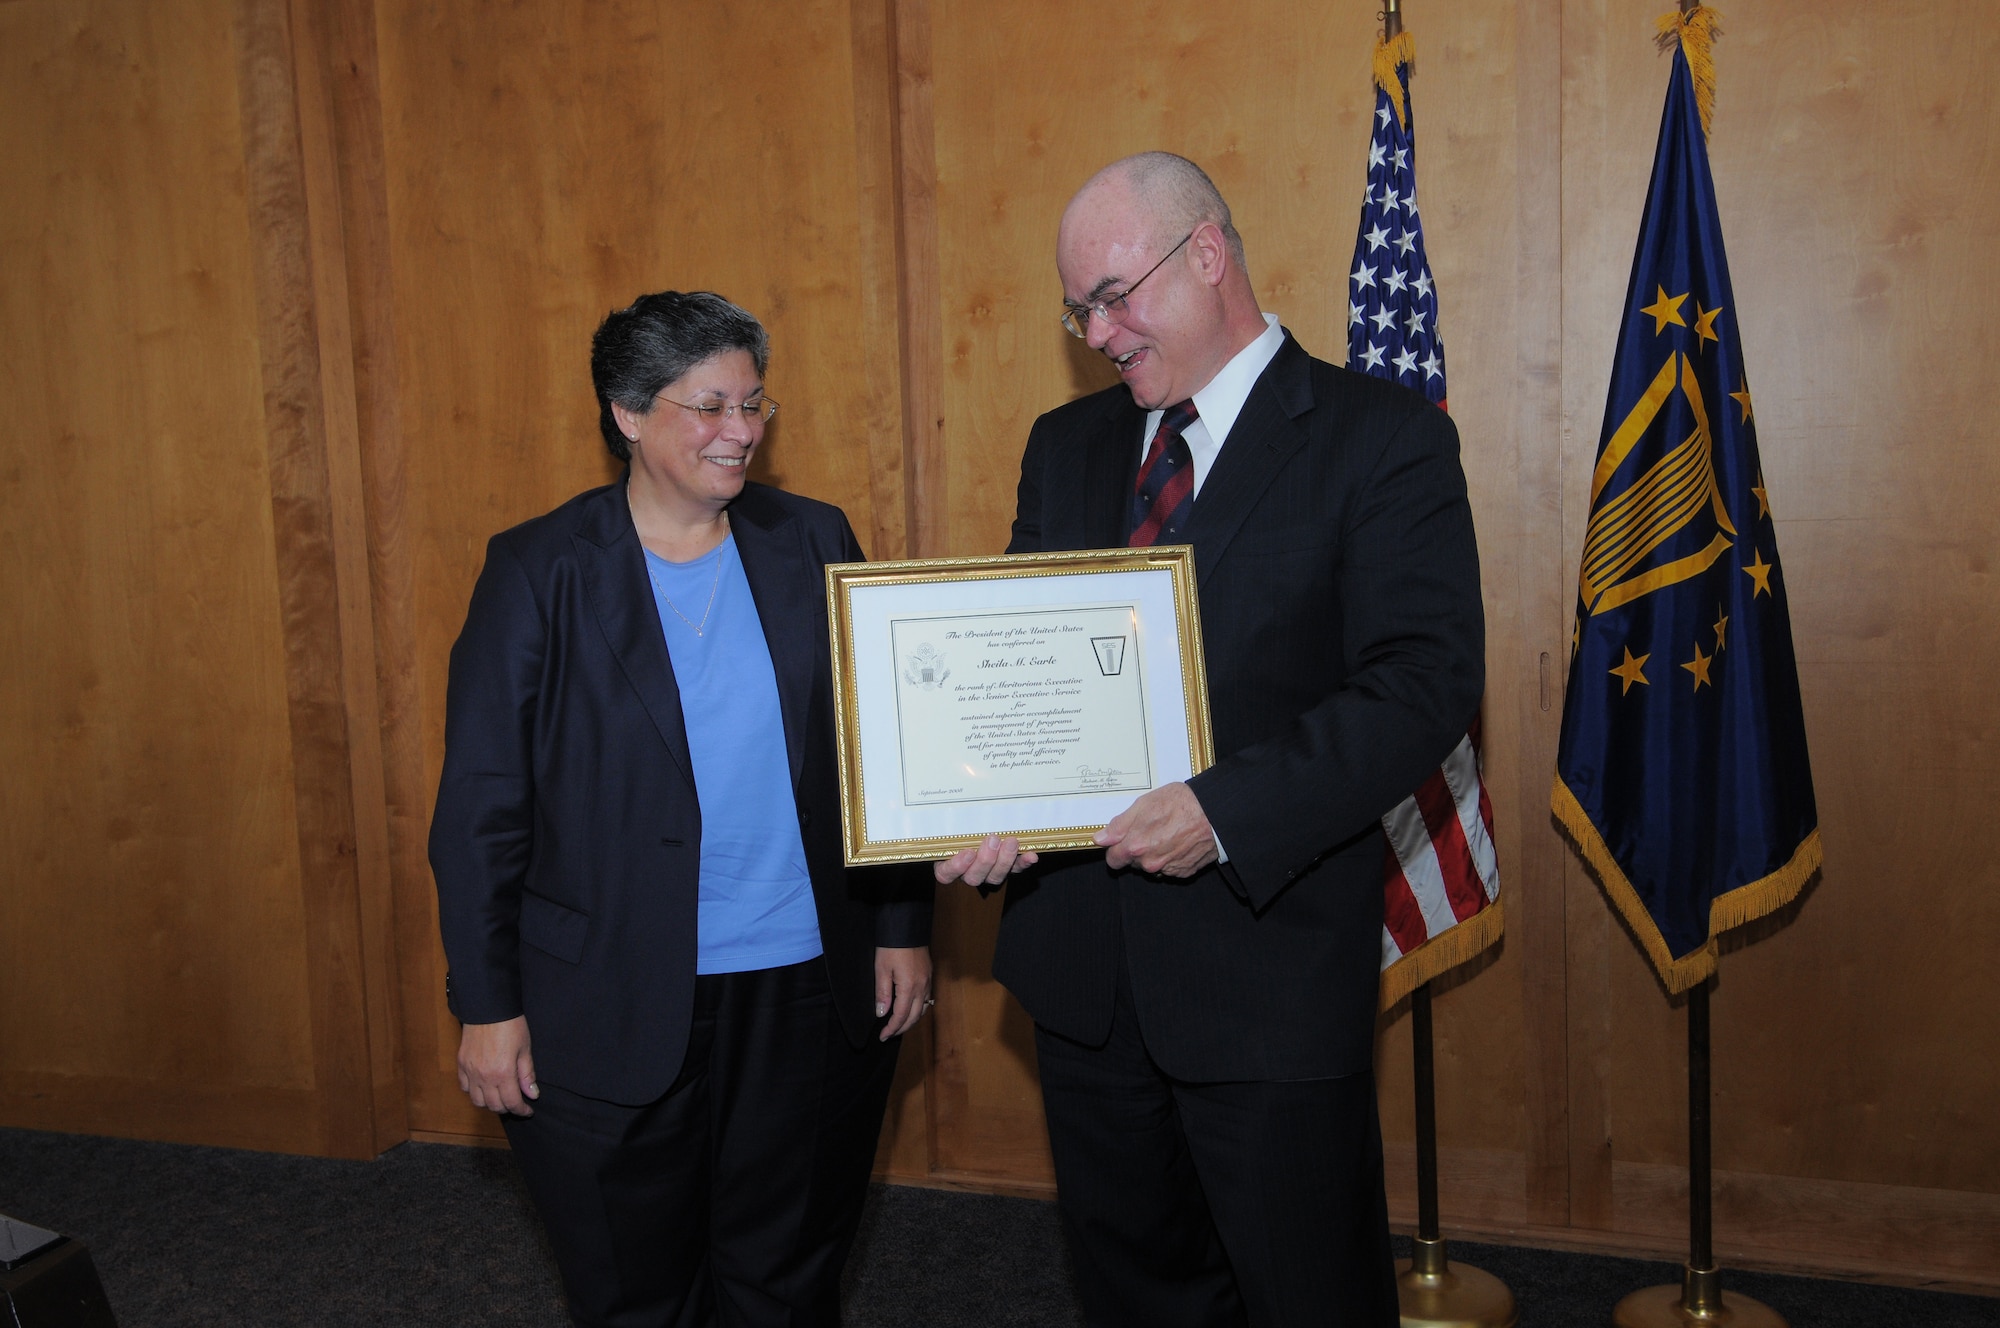 Bill Carr, deputy undersecretary, military personnel policy, Office of the Secretary of Defense, presents a Presidential Rank Award to Sheila Earle, Air Force Personnel Center executive director, during a ceremony Dec. 9. Ms. Earle was conferred the rank of "Meritorious Executive in the Senior Executive Service" for her accomplishments in U.S. Government program management and for her quality and efficiency in service to the public. (U.S. Air Force photo by Melissa Peterson)
